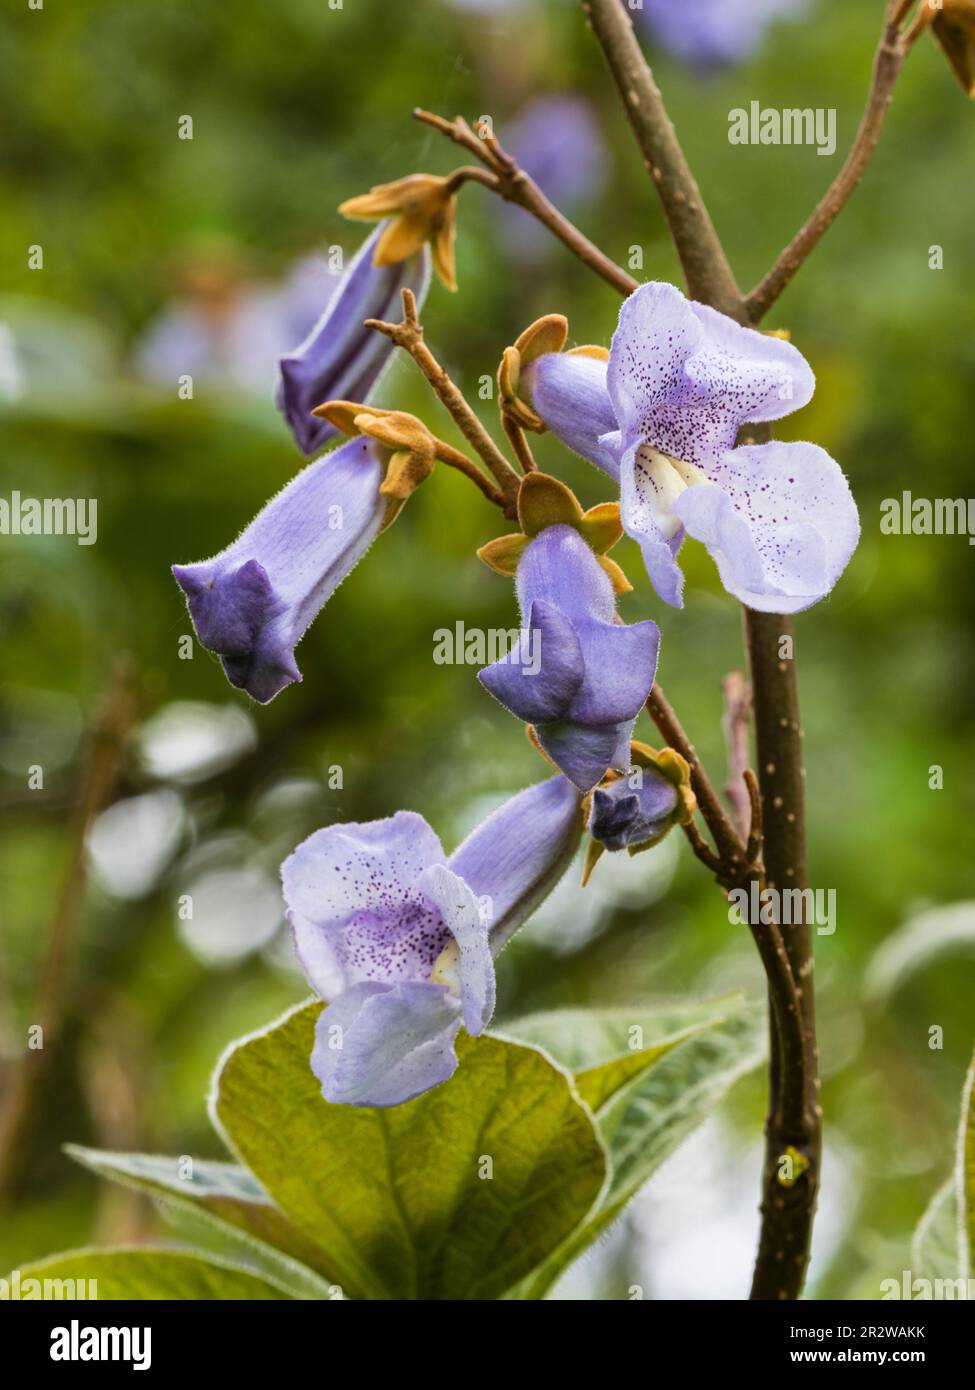 Blue spotted late spring flowers of the fast growing deciduous Sapphire dragon tree, Paulownia kawakamii Stock Photo